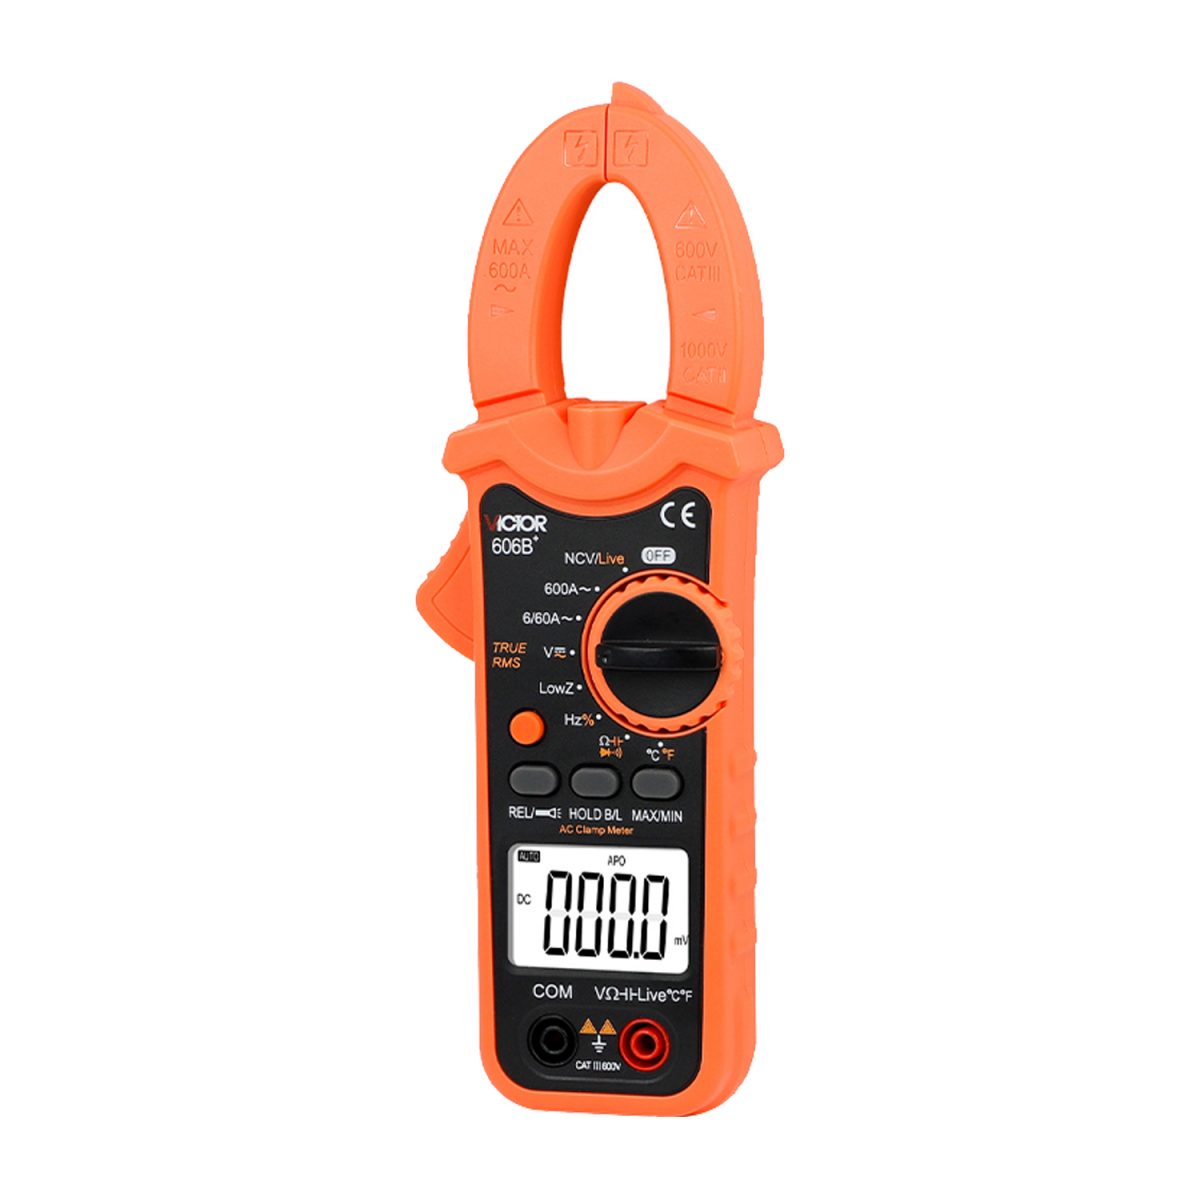 VICTOR 606B+ 600A AC Clamp Meter